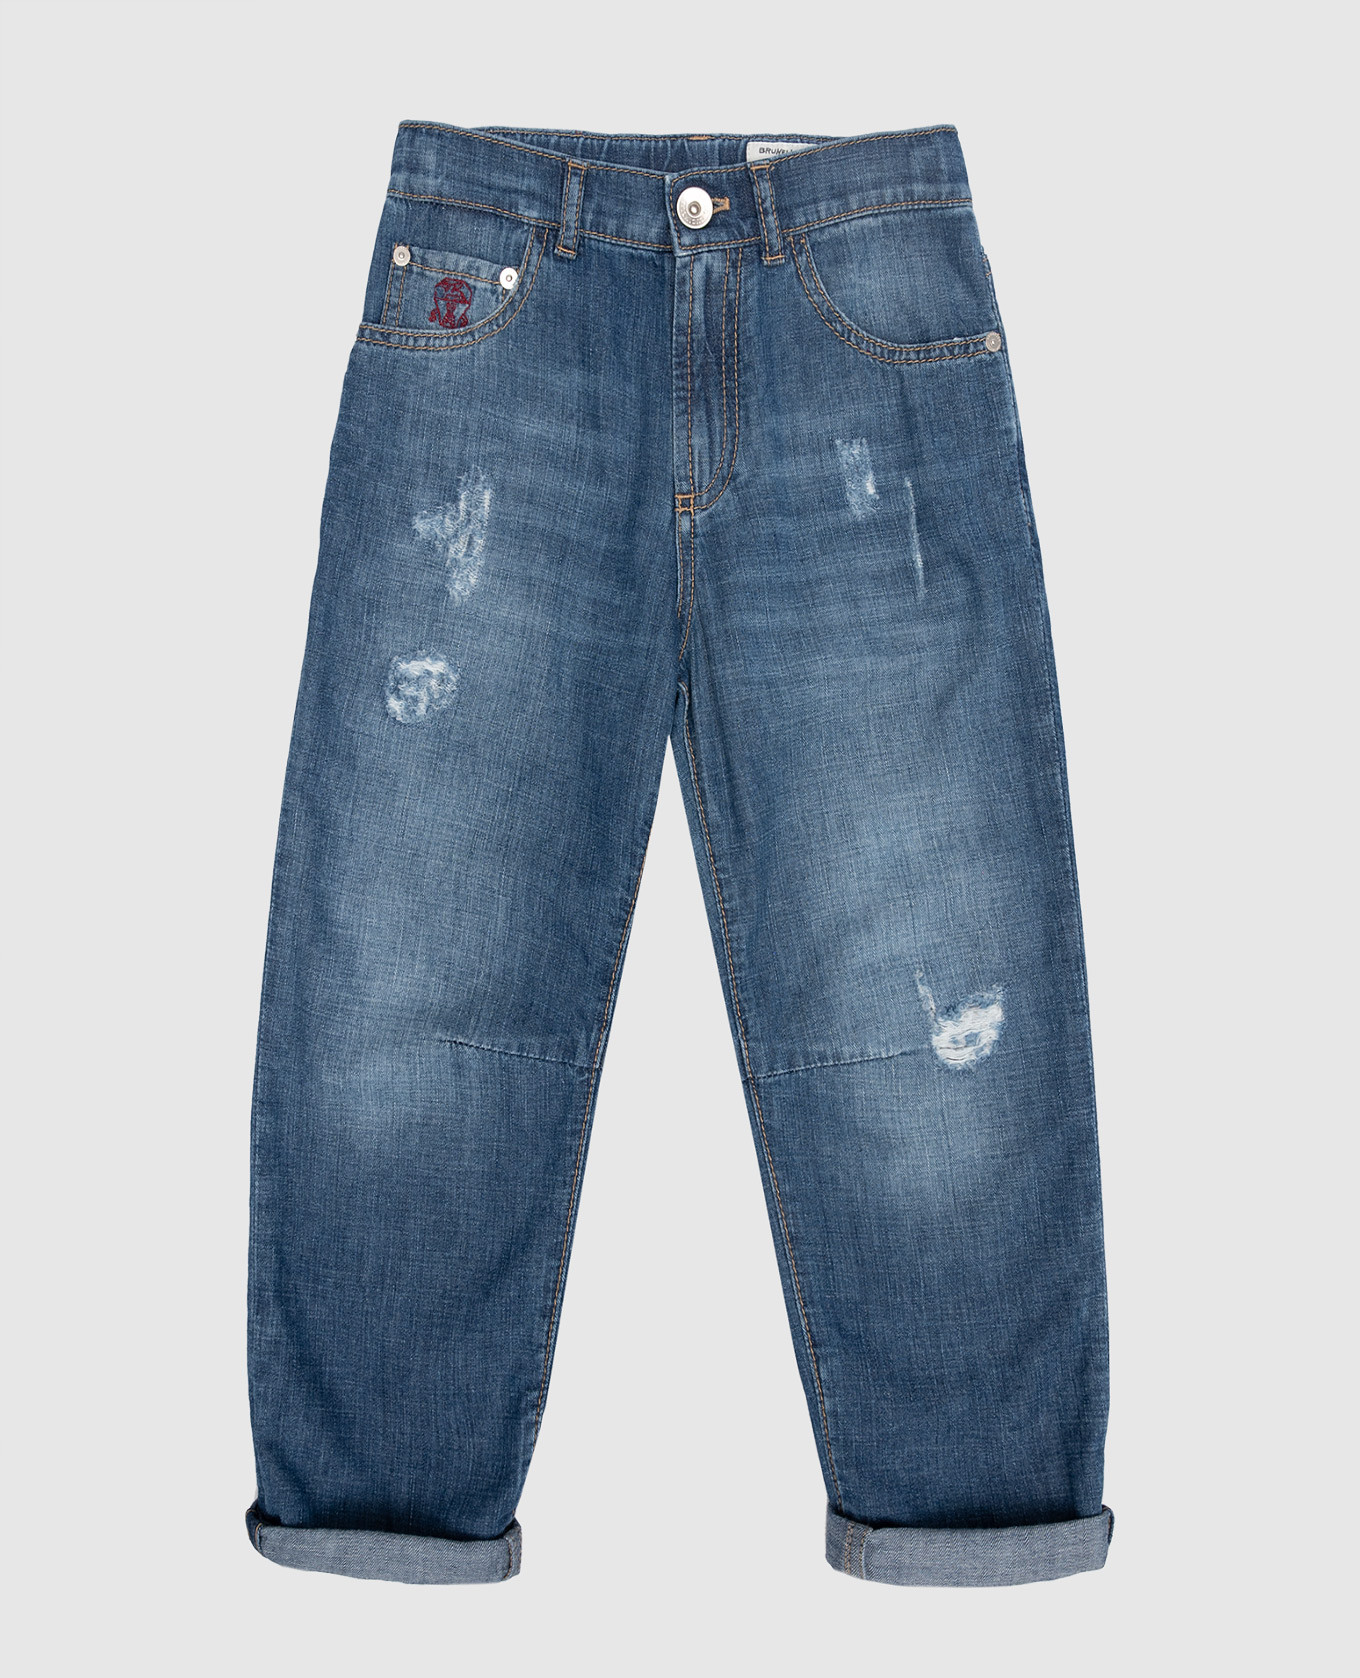 Children's blue jeans with holes